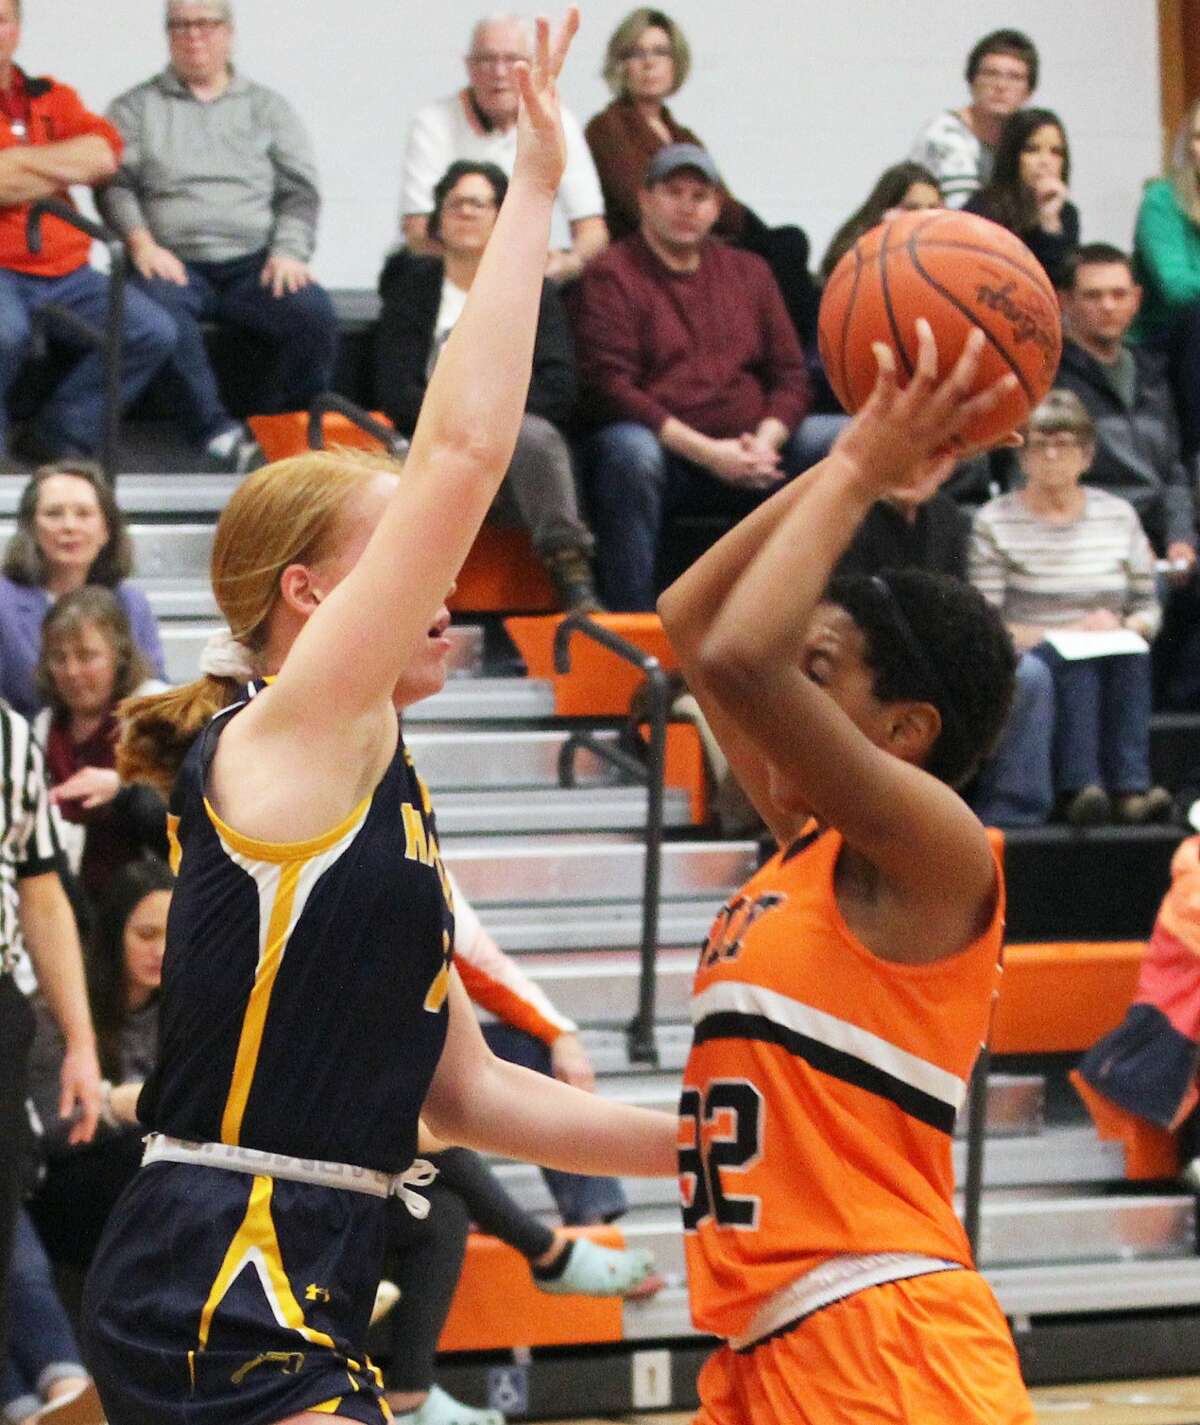 The Ubly girls basketball team improved to 18-1 on the season with a 58-32 home win over Bad Axe on Monday night. The Ubly girls basketball team improved to 18-1 on the season with a 58-32 home win over Bad Axe on Monday night.